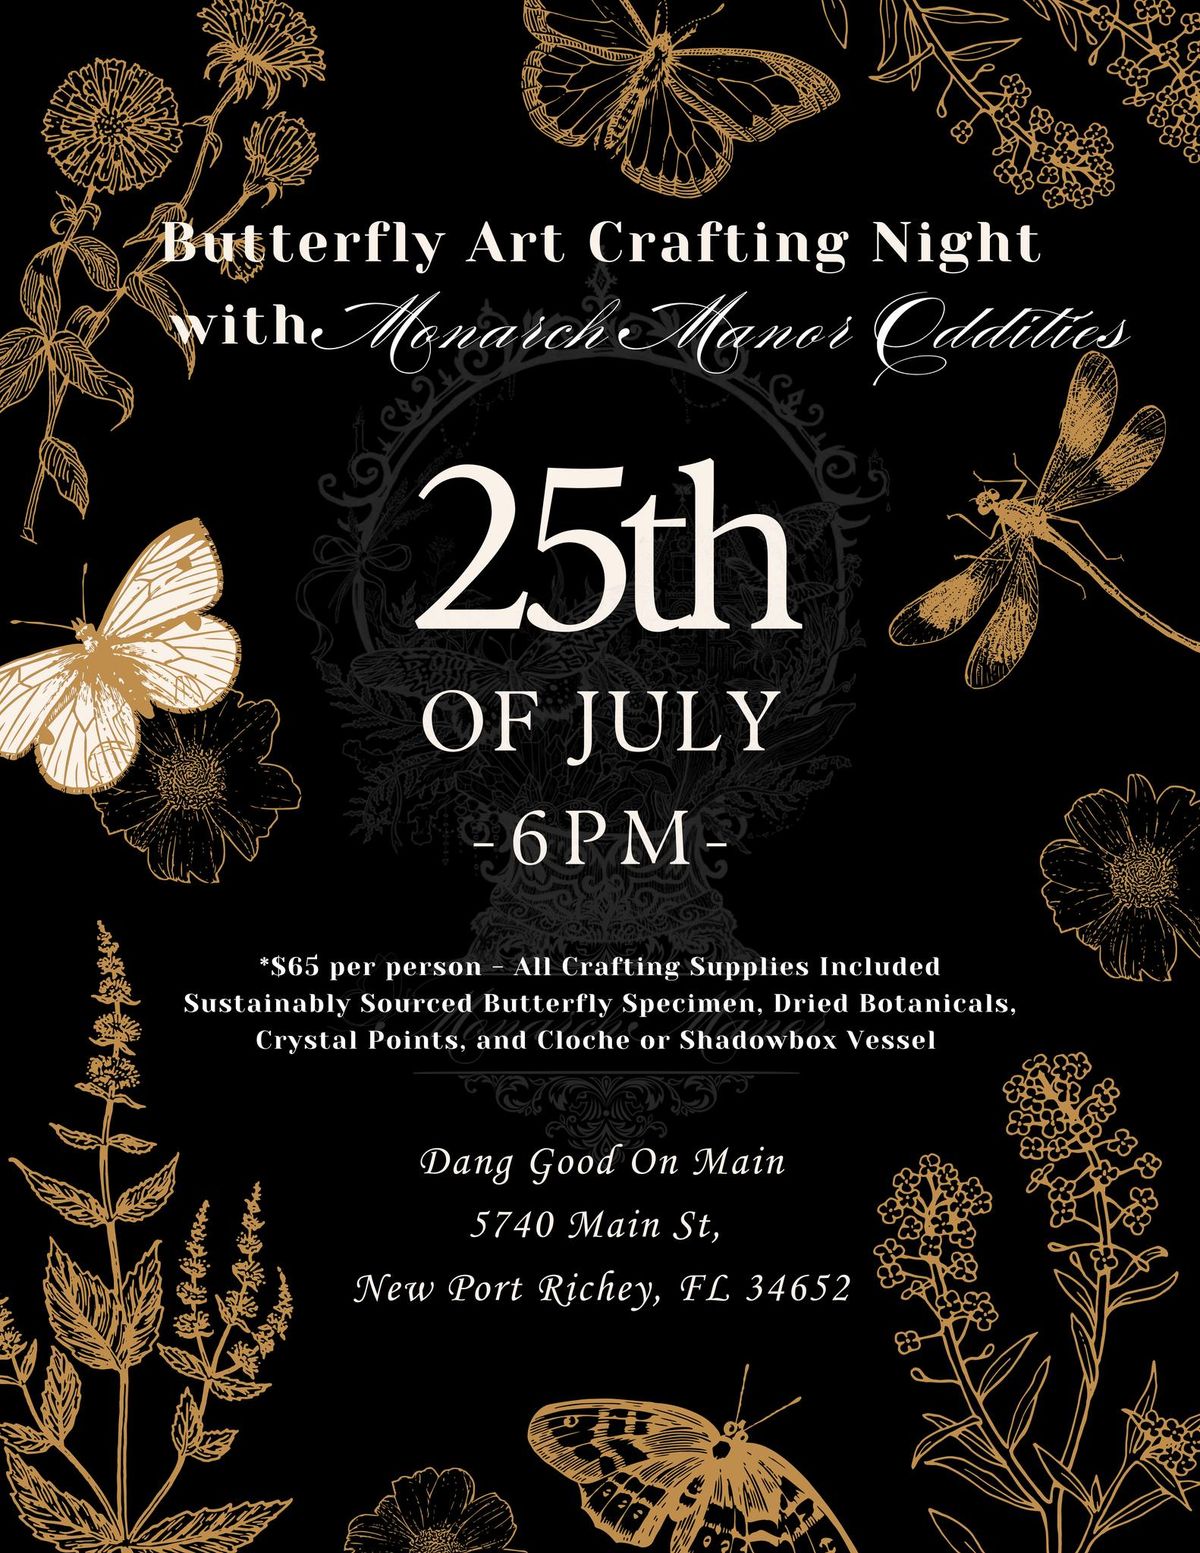 Butterfly Art Crafting Class with Monarch Manor Oddities \ud83e\udd8b